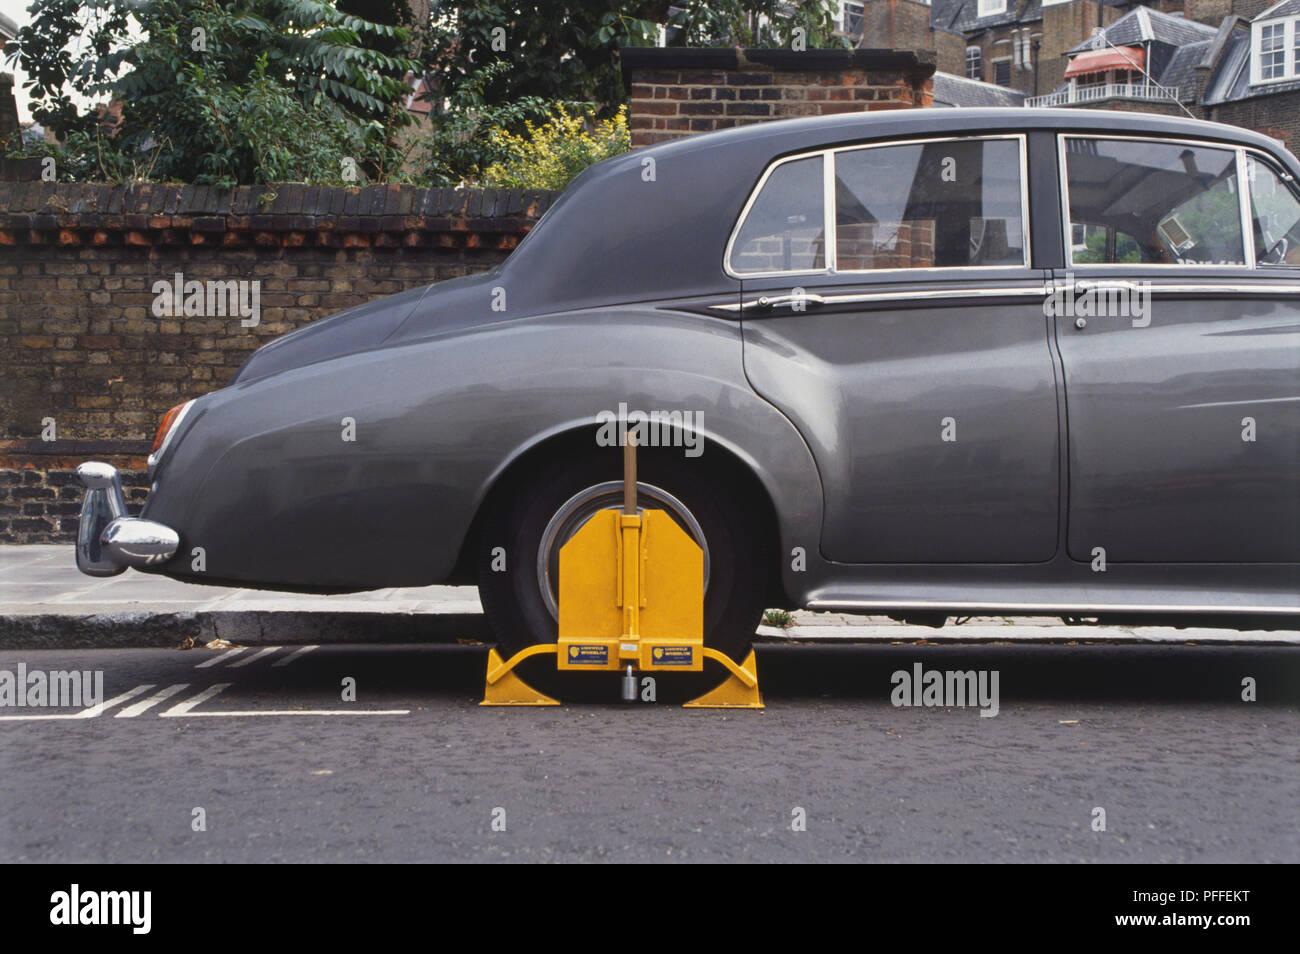 England, London, parked car with a yellow clamp on its back wheel, side view. Stock Photo